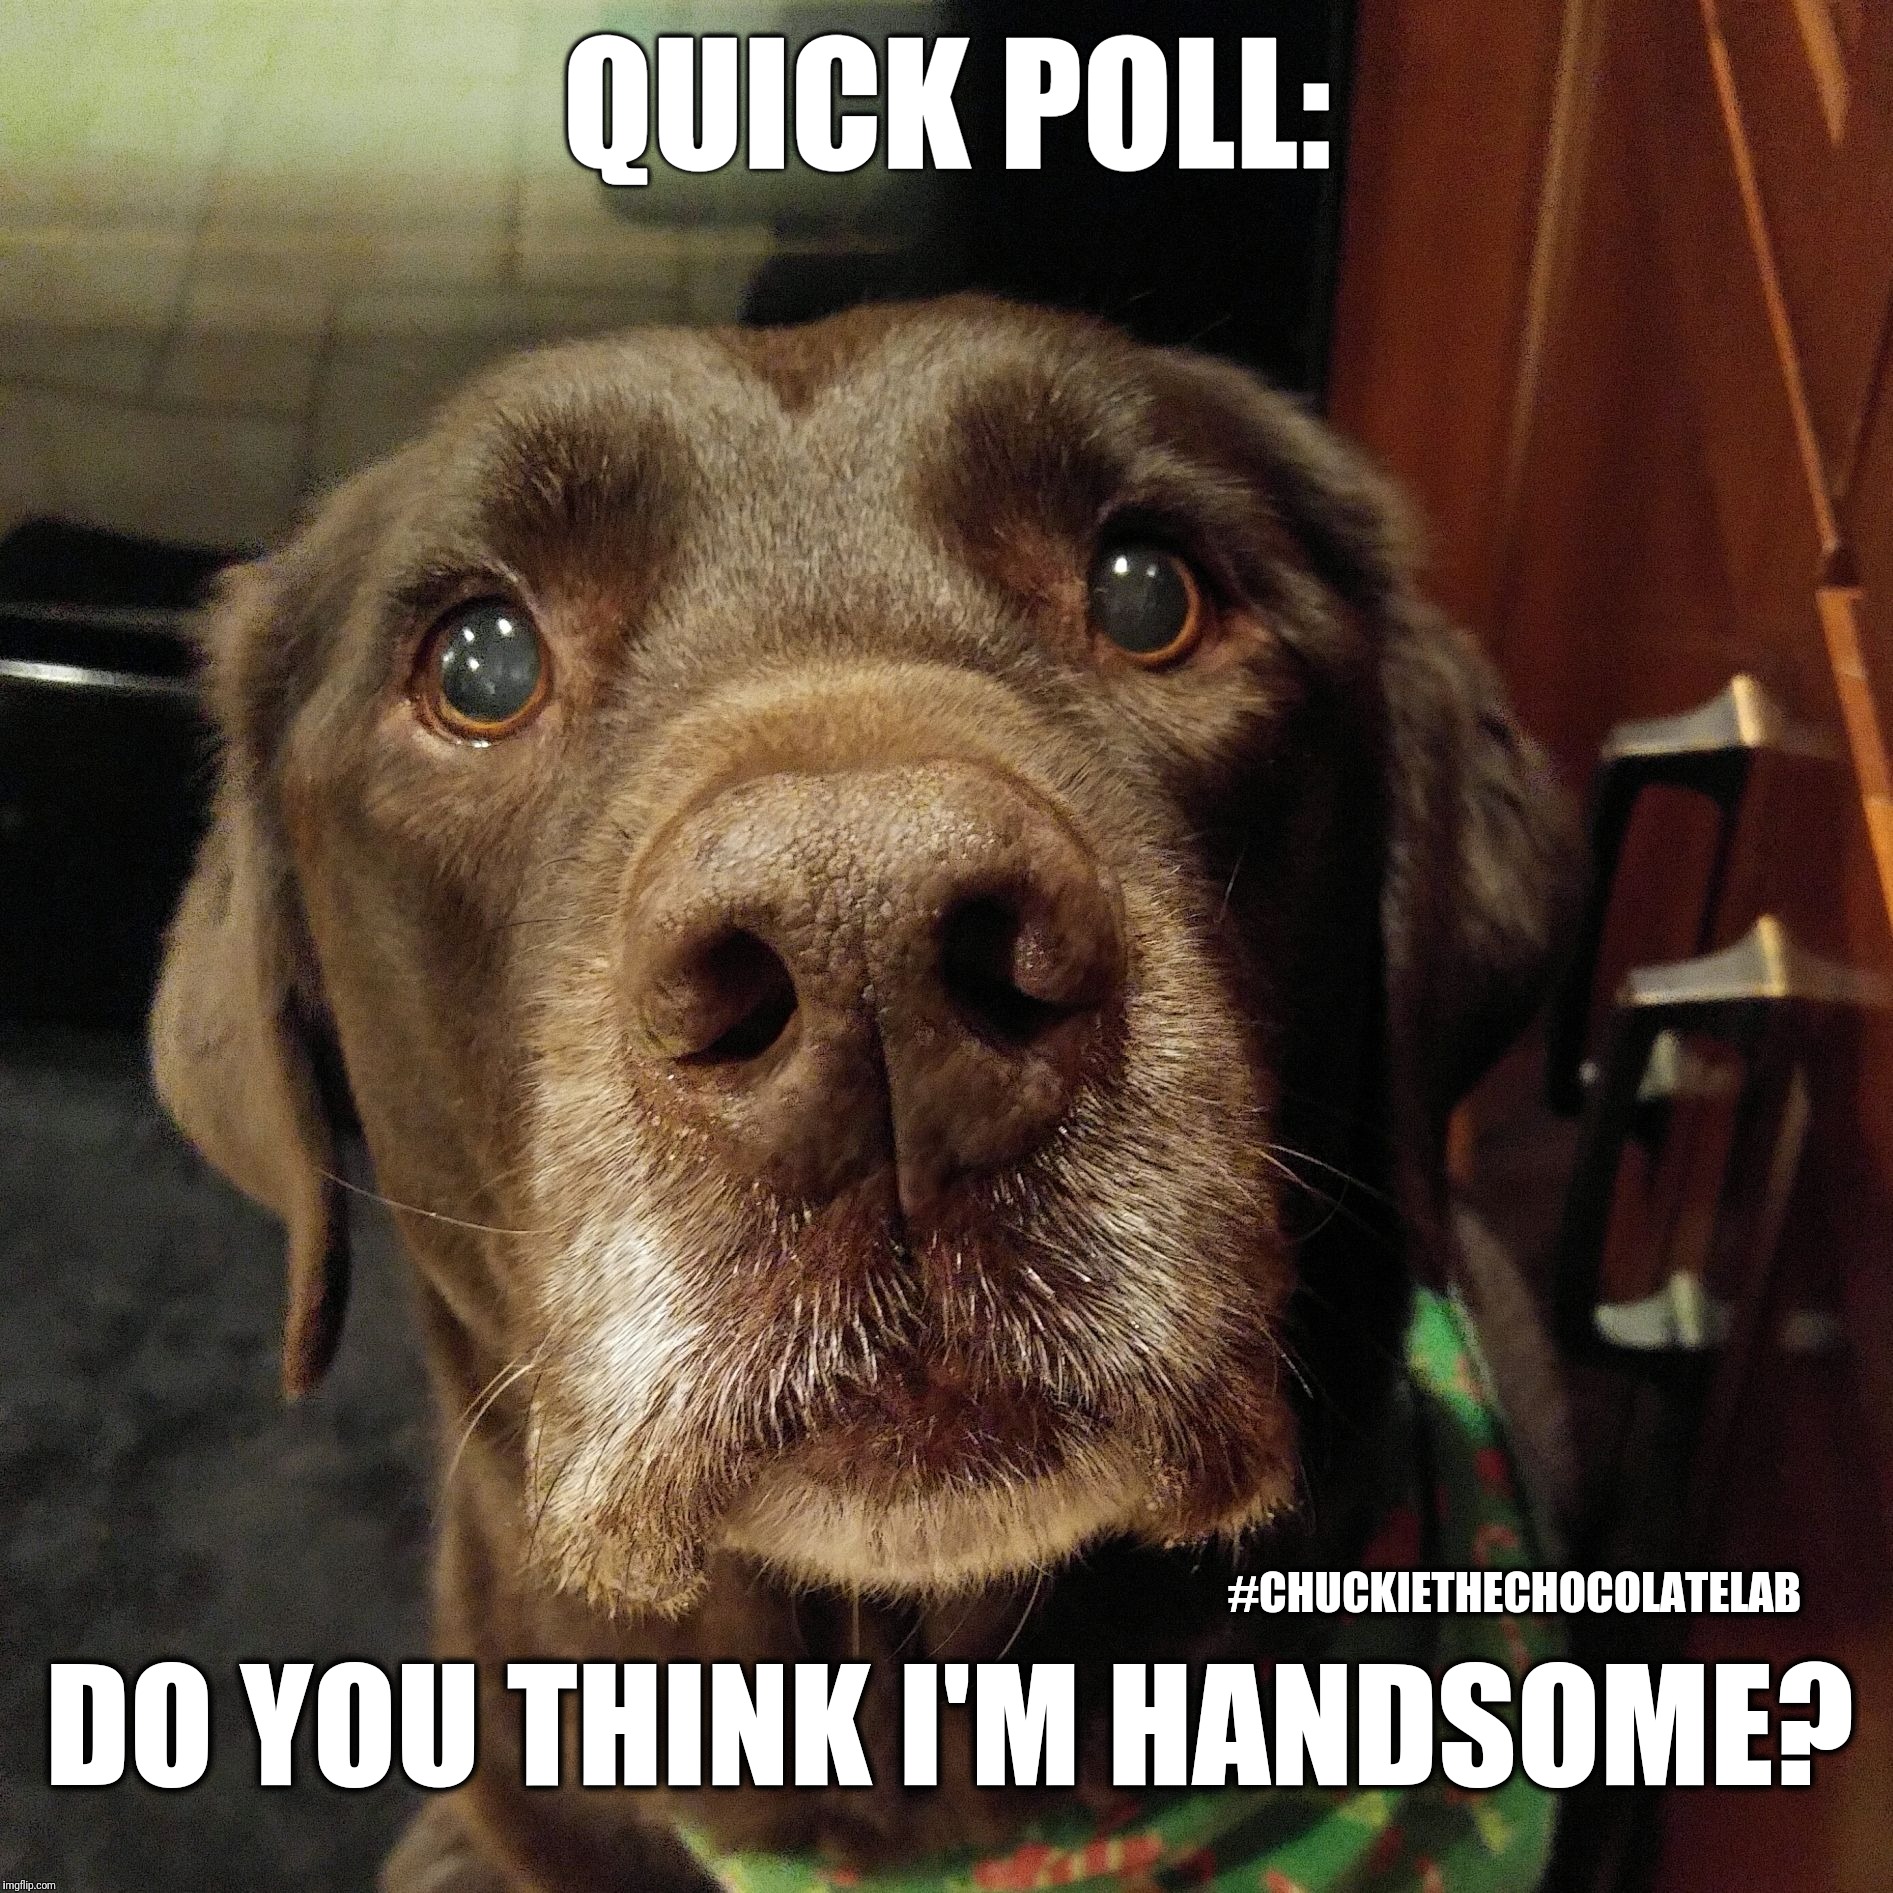 Do you think I'm handsome?  | QUICK POLL:; DO YOU THINK I'M HANDSOME? #CHUCKIETHECHOCOLATELAB | image tagged in chuckie the chocolate lab teamchuckie,handsome,dogs,funny,memes,cute | made w/ Imgflip meme maker